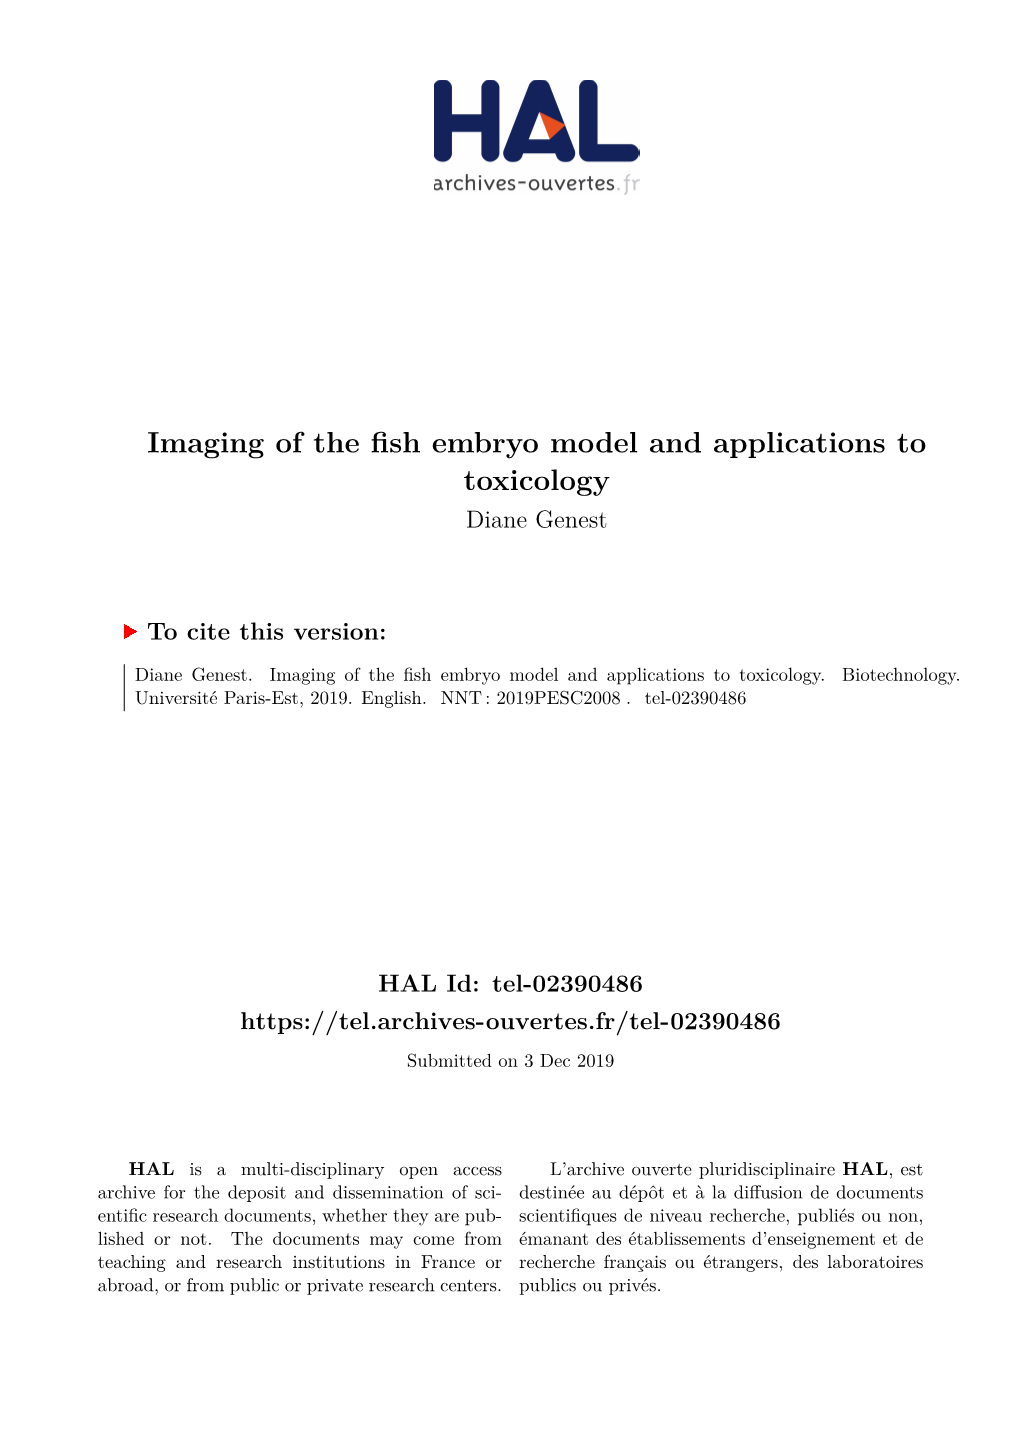 Imaging of the Fish Embryo Model and Applications to Toxicology Diane Genest